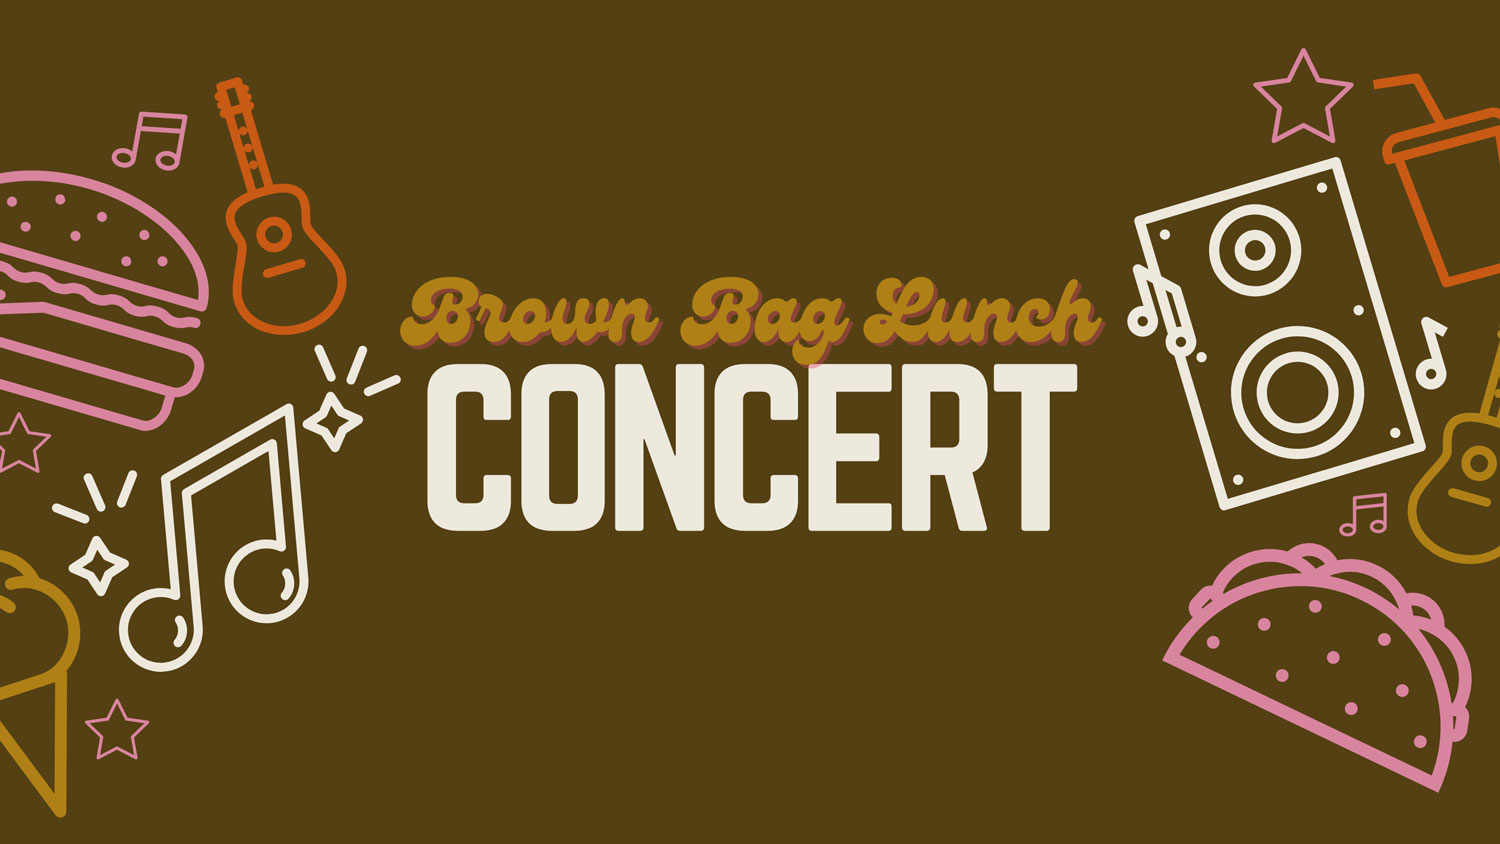 Graphic in muted brown, orange, gold and pink shows icons of tacos, burgers, guitars and musical notes, and reads "Brown Bag Lunch Concert"